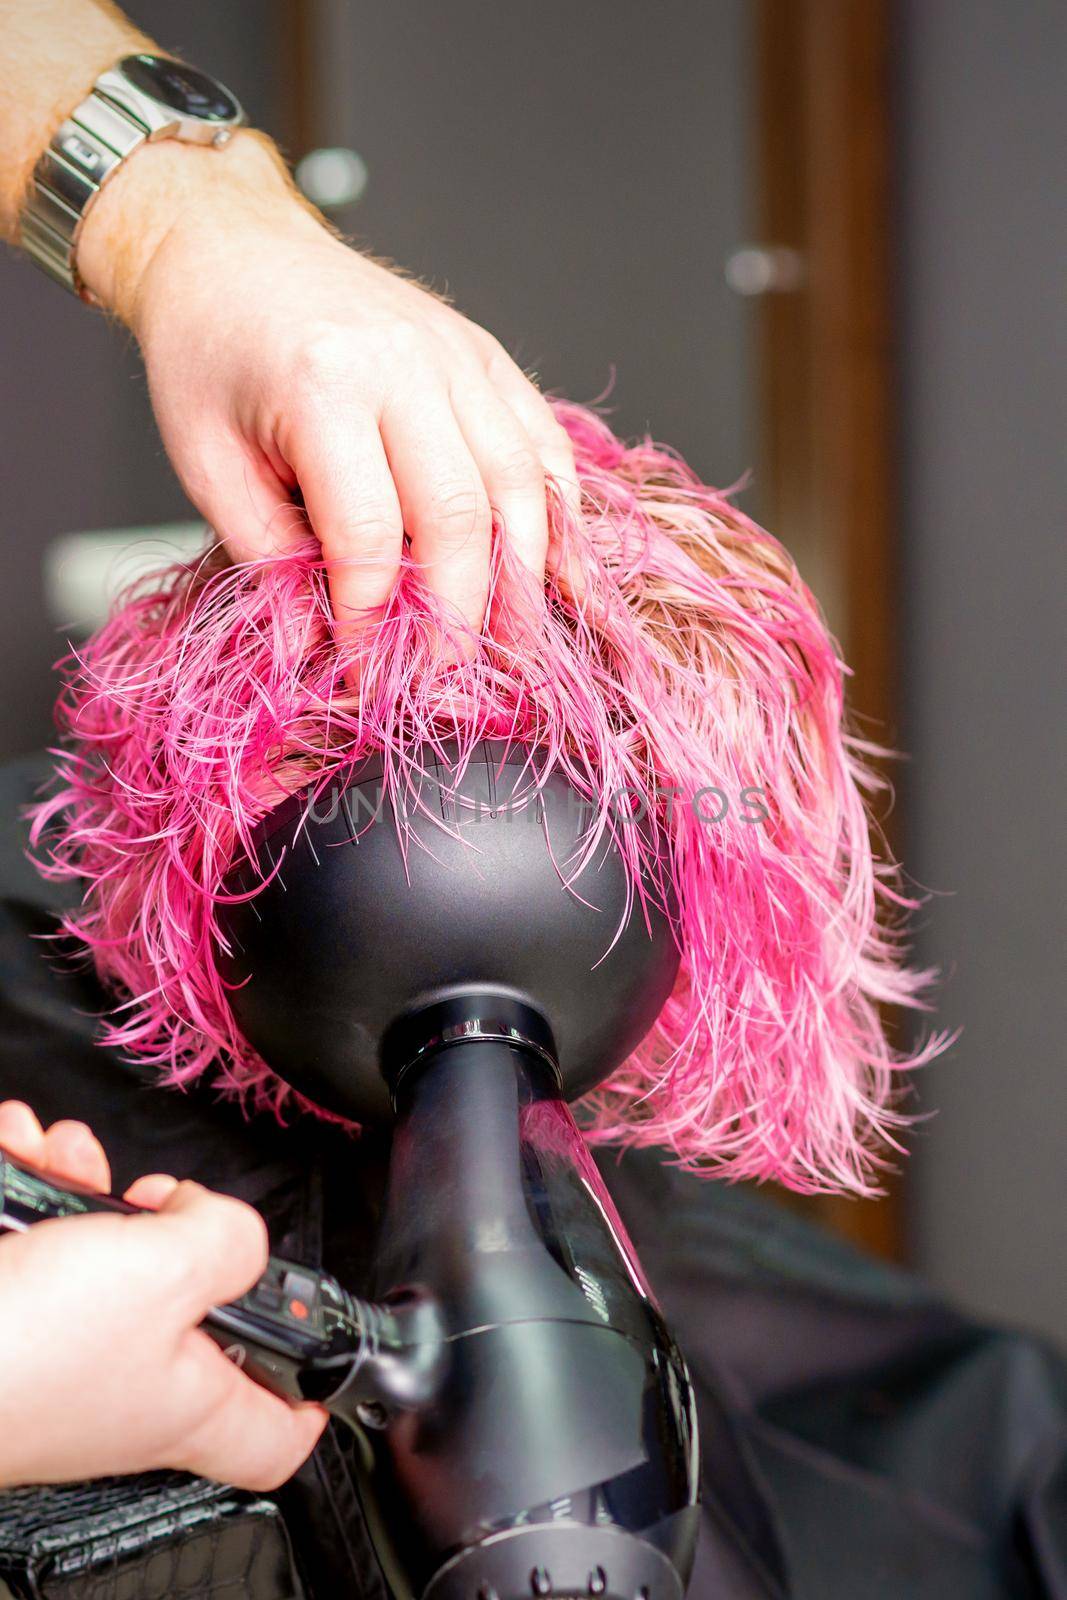 Hair Stylist making hairstyle using hair dryer blowing on wet custom pink hair at a beauty salon. by okskukuruza